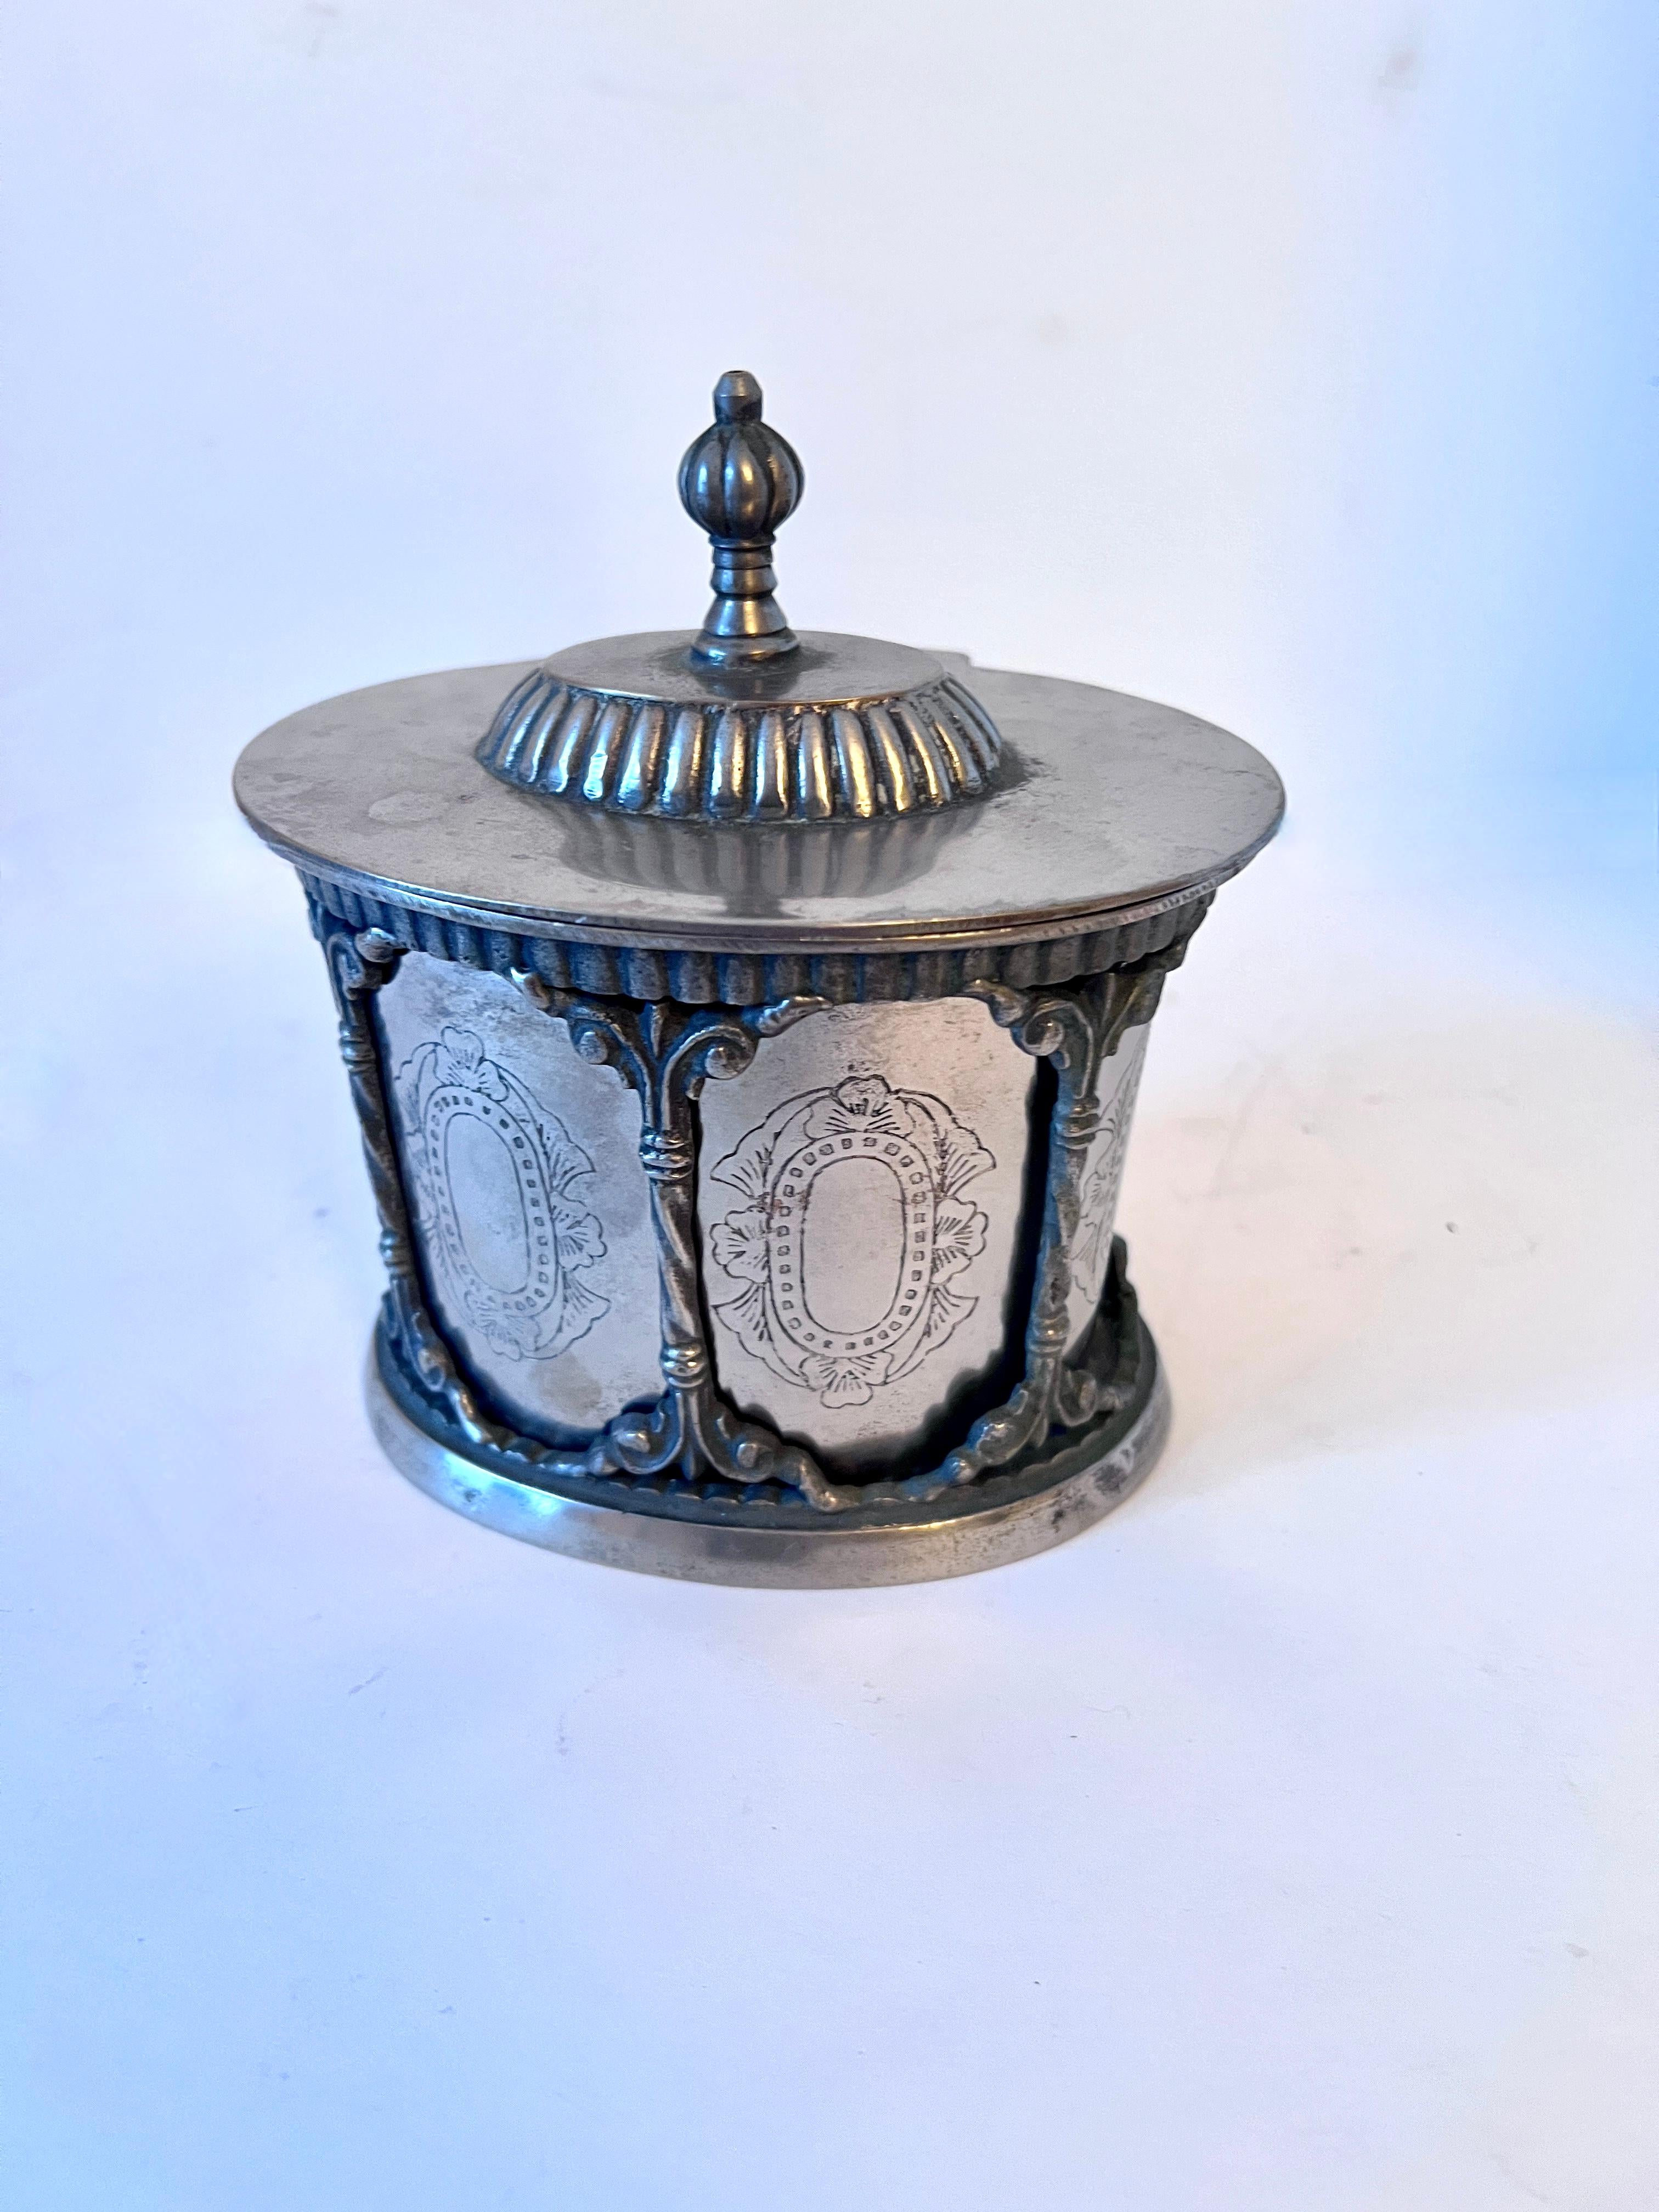 A wonderful Tea Caddy designed to be removed from the ornate framework.  A great piece for tea, tobacco, 420 or useful as at a work station or desk to hold various supplies, also in the bath to hold Q-tips or cotton balls.

Many uses, and